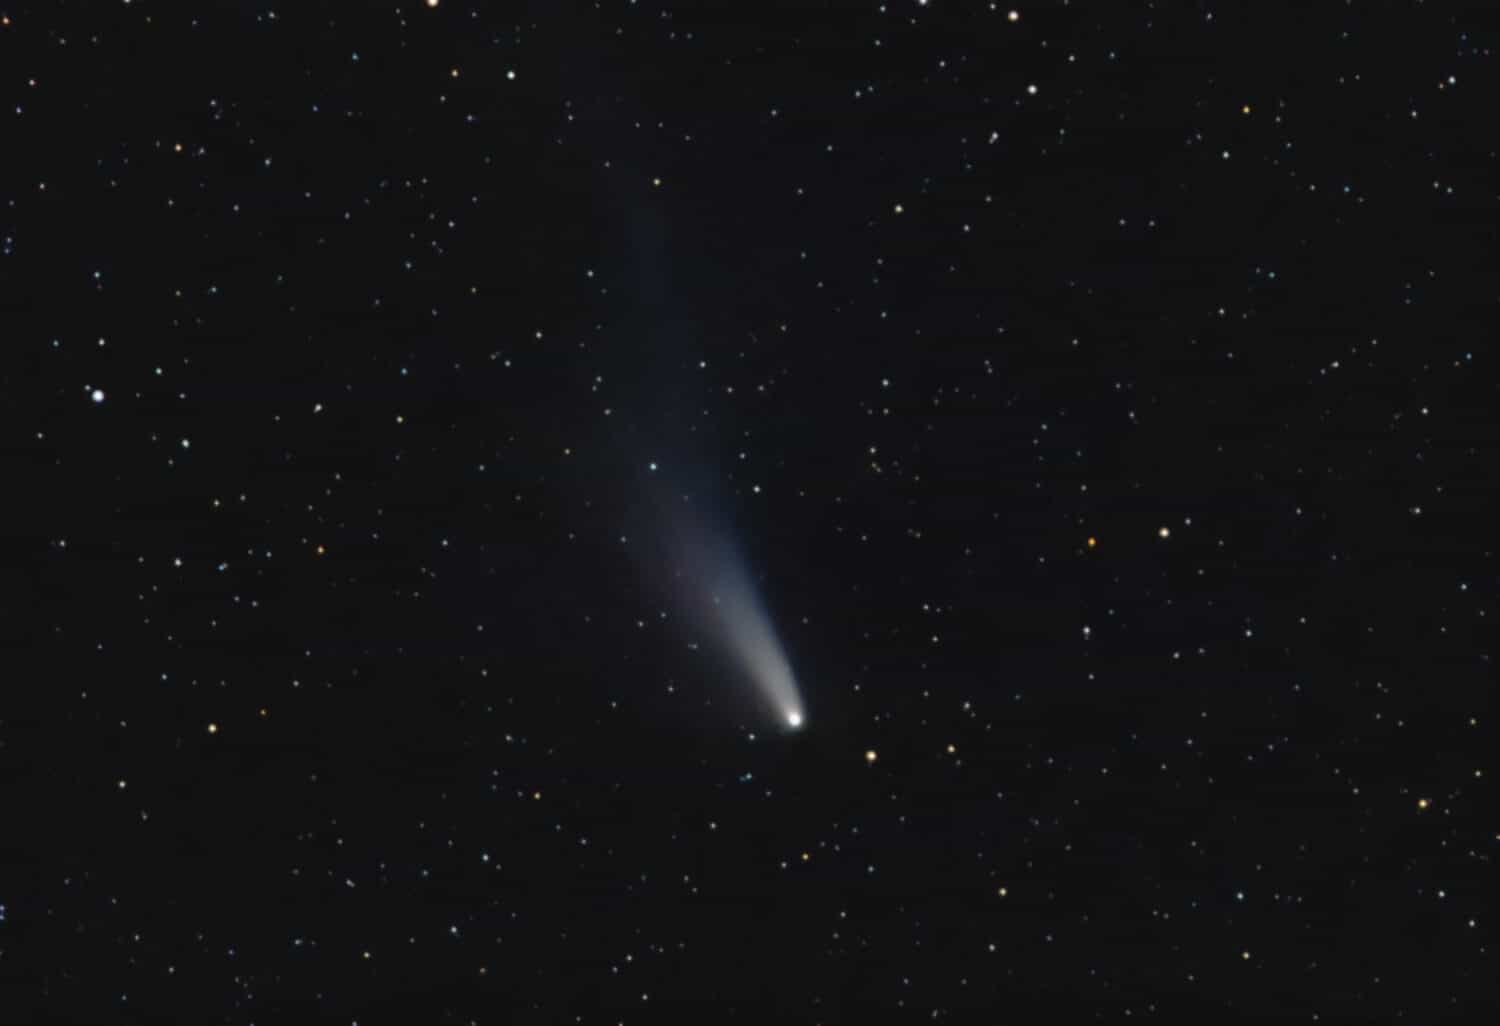 Halley's Comet, photographed during its last appearance in 1986. Amateur image made using a 35mm SLR camera and film, with a 135mm telephoto lens.